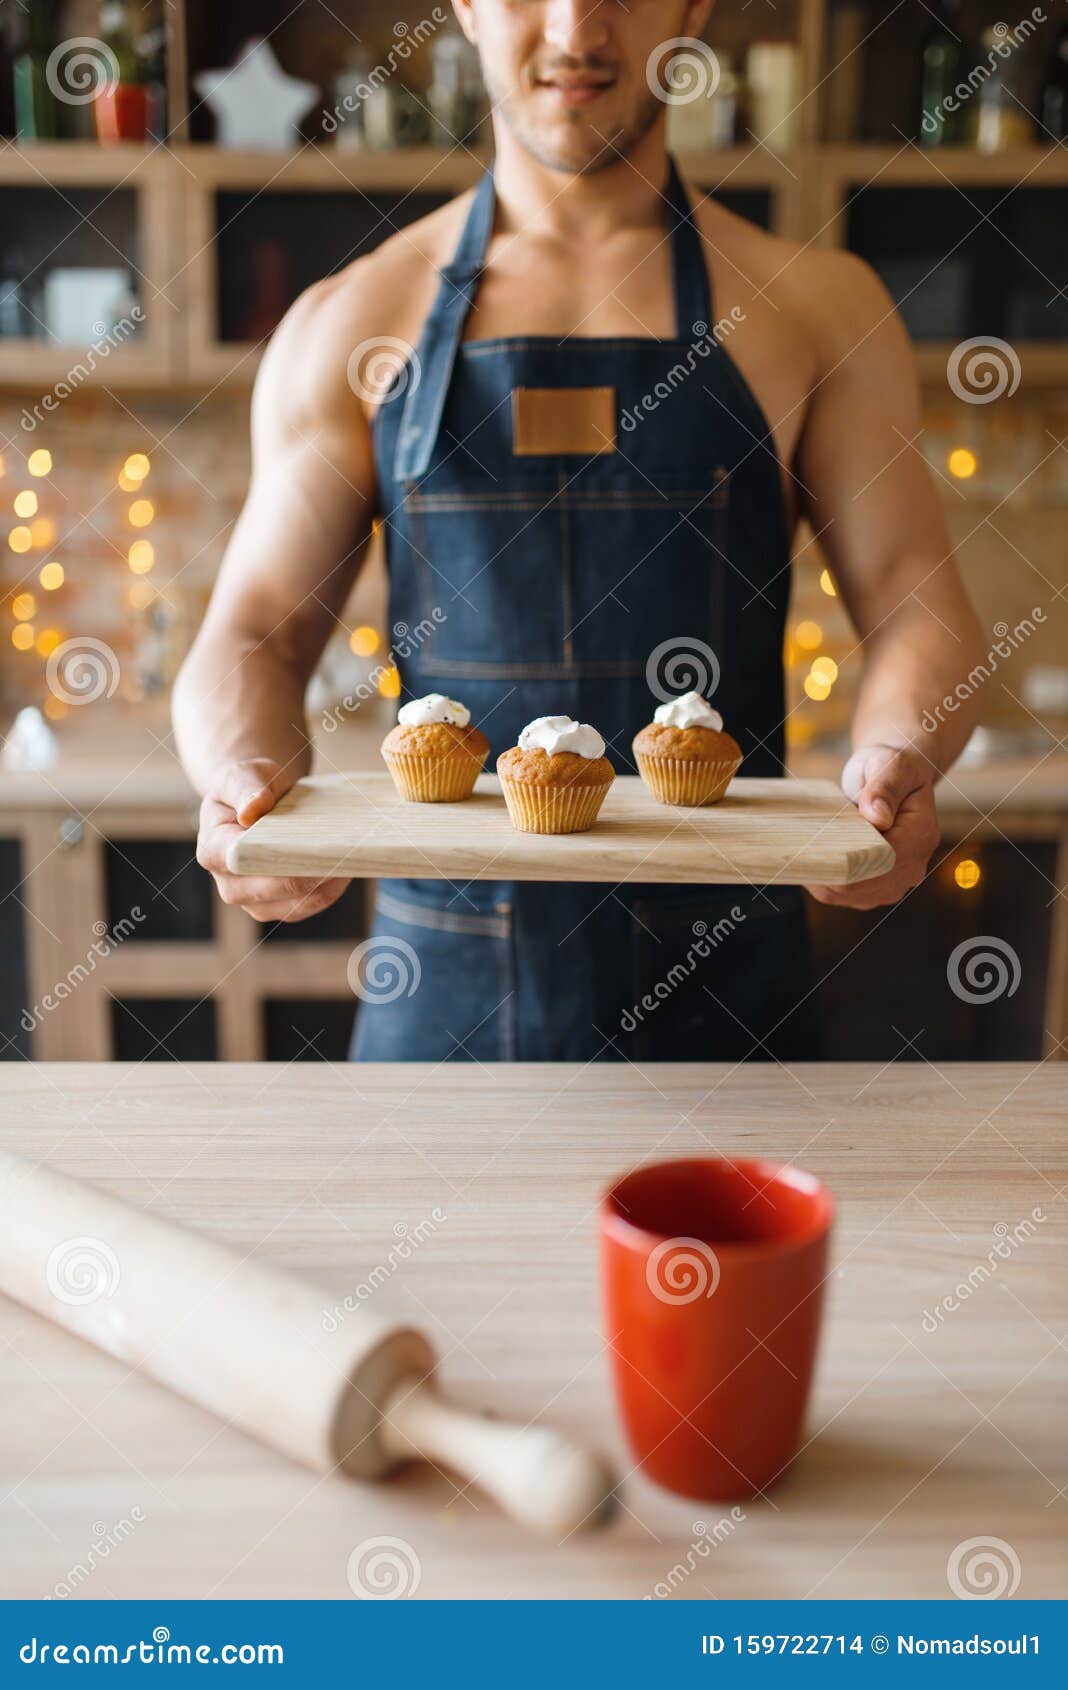 The nude chef